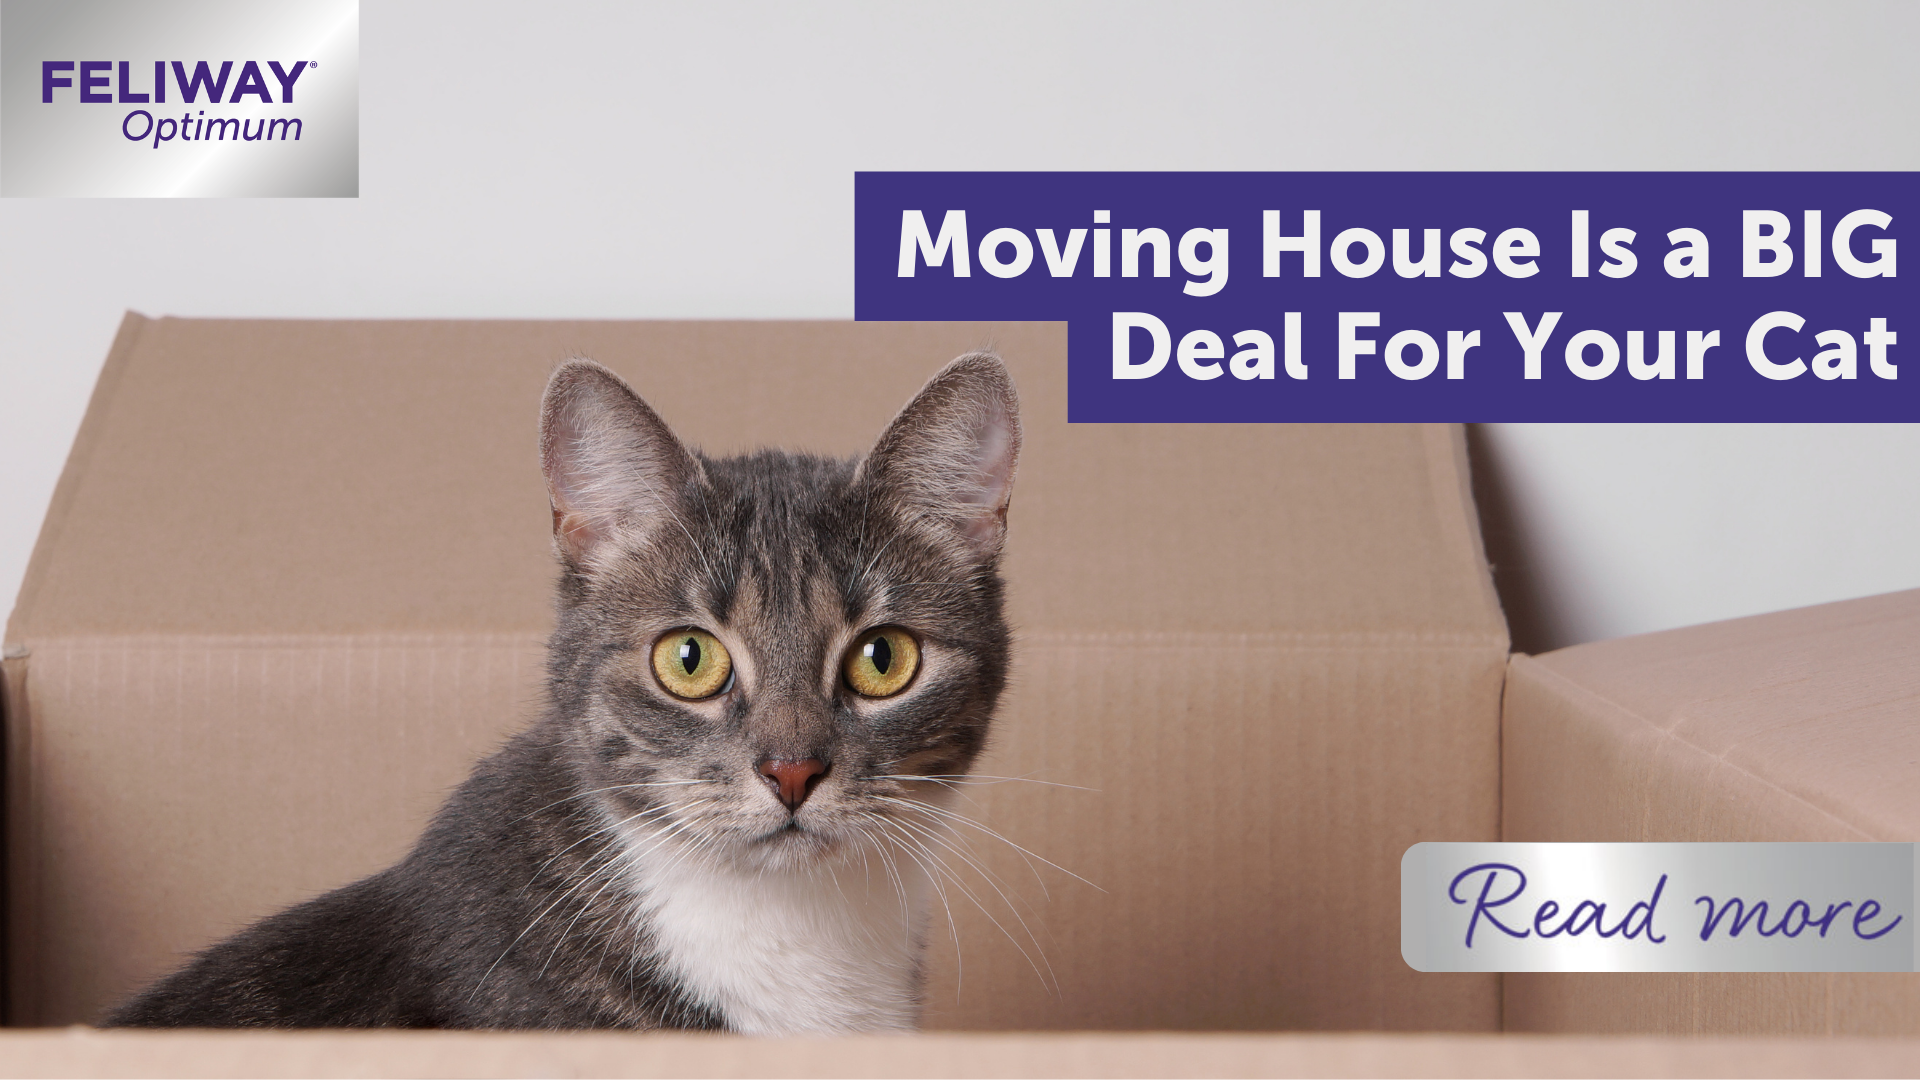 Moving house is a BIG deal for your cat